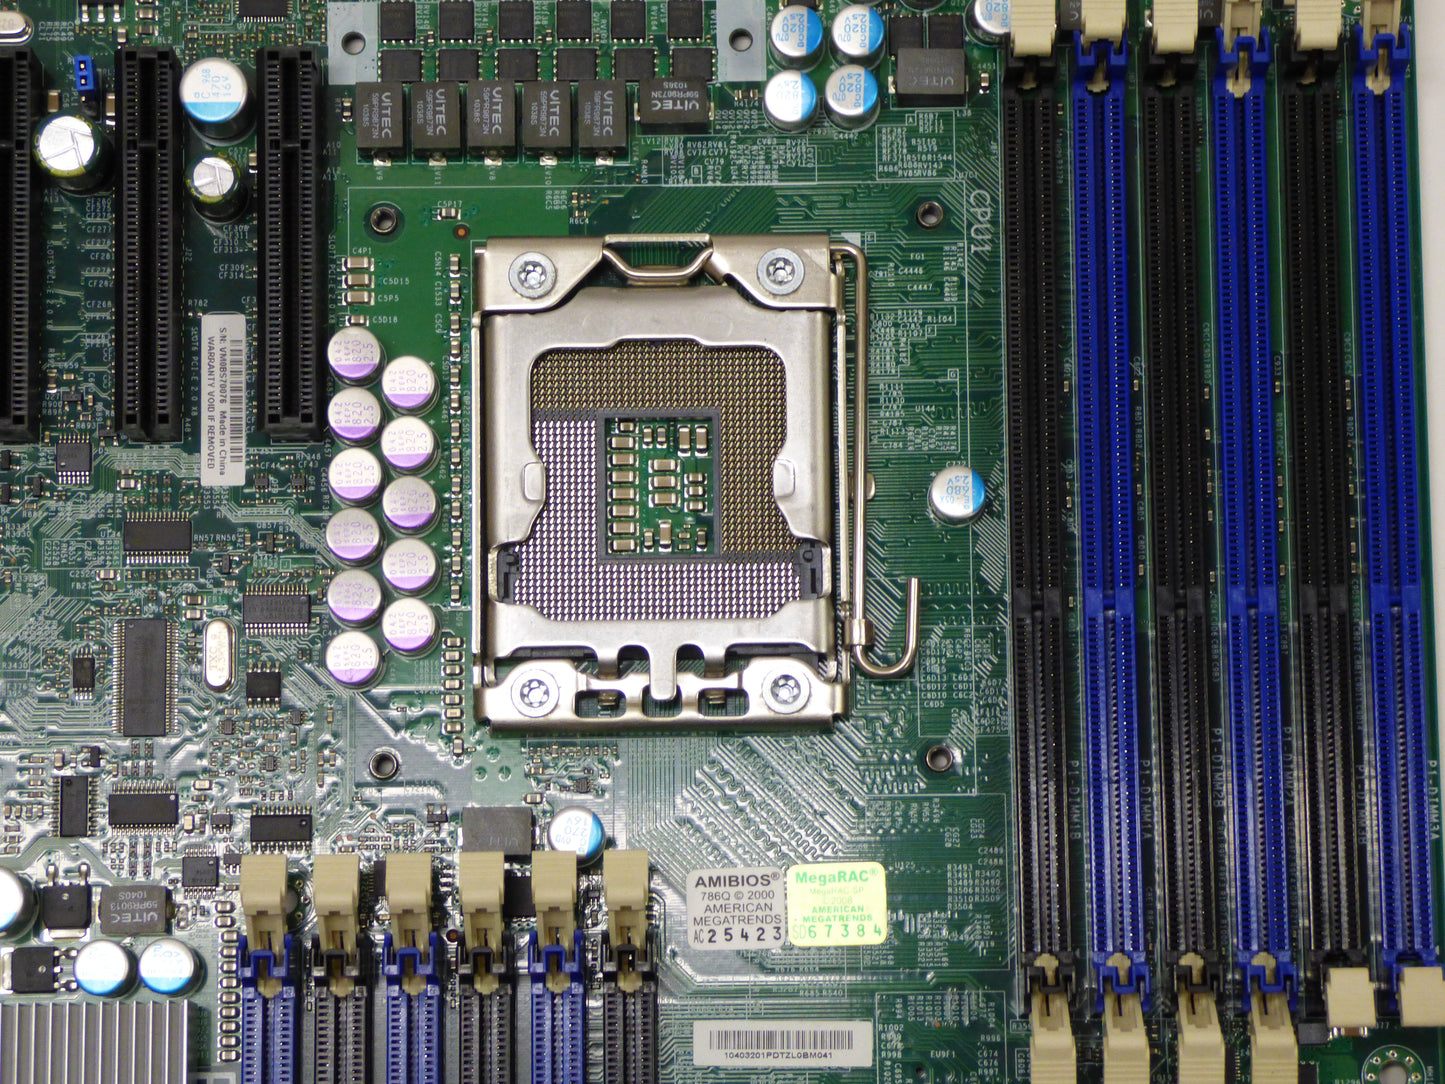 supermicro x8dti-f cpu 1 and dimm slots